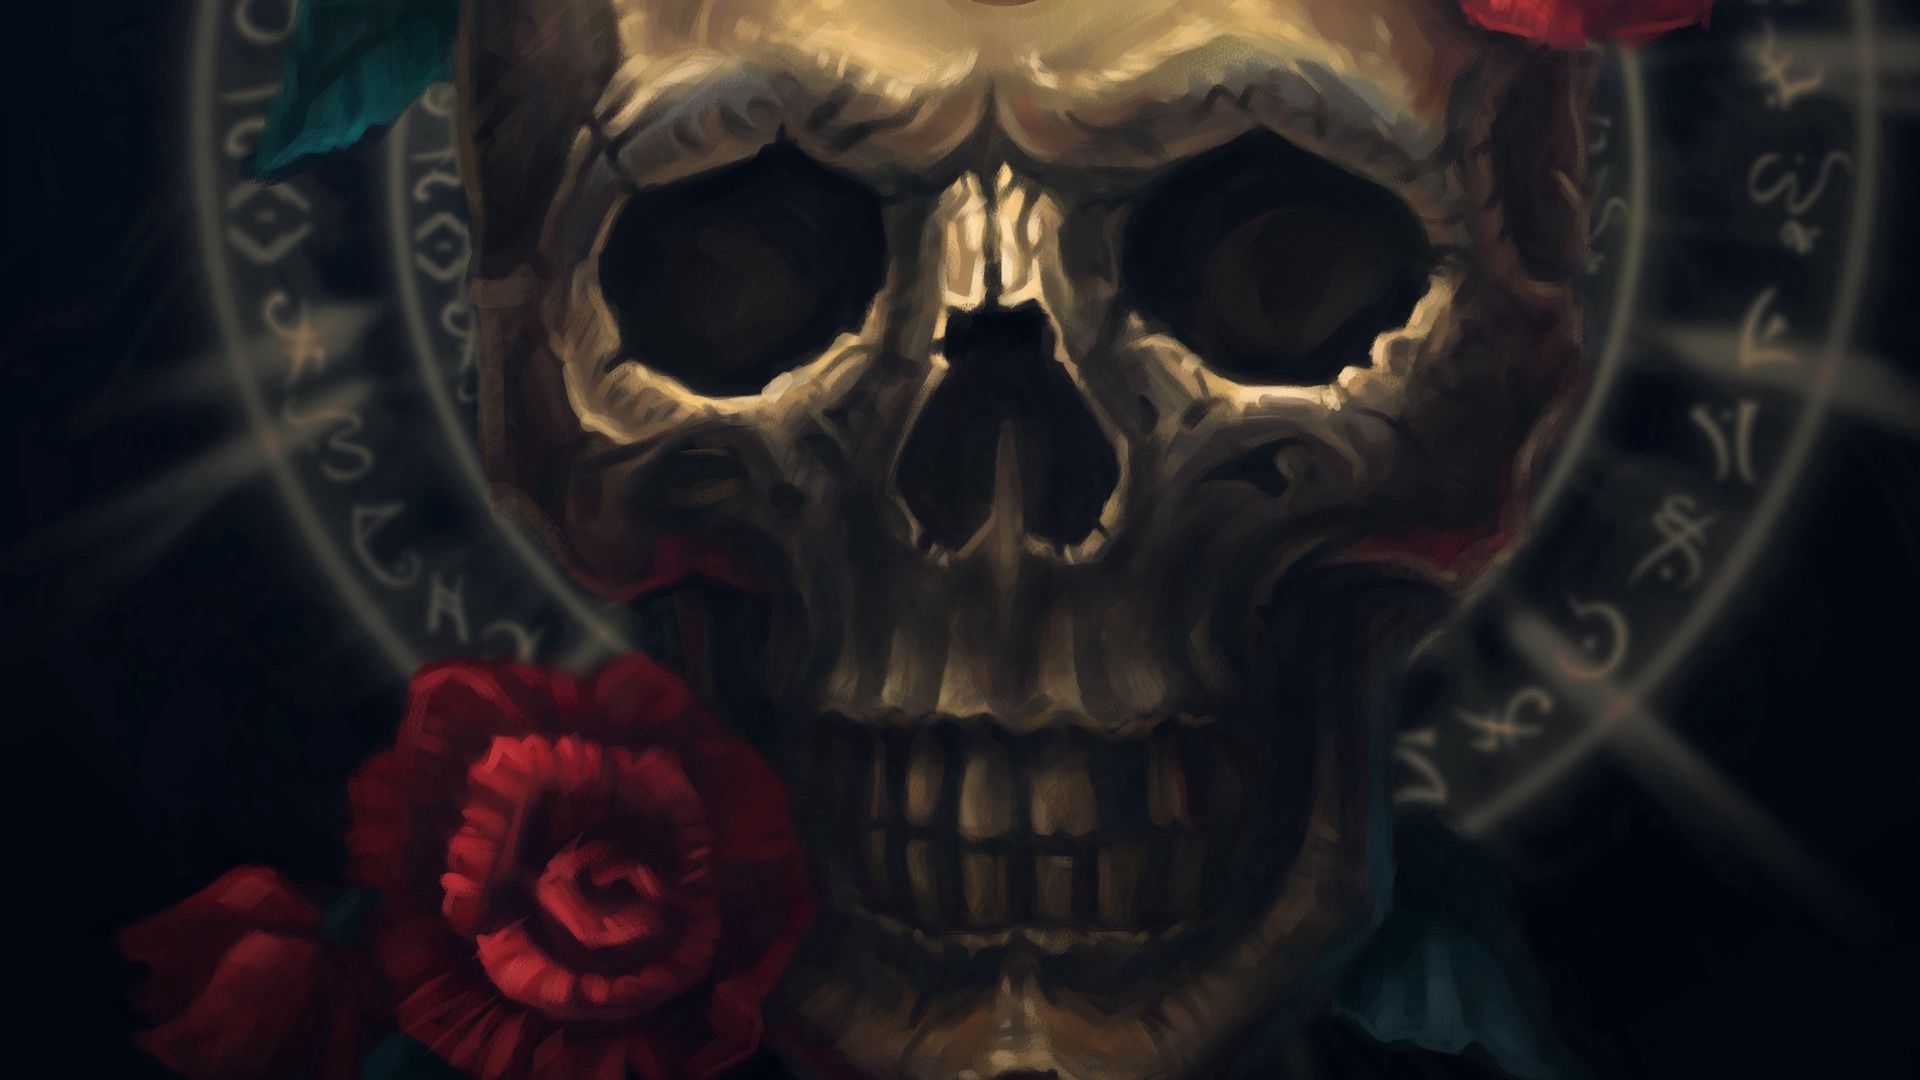 skull and roses wallpapers